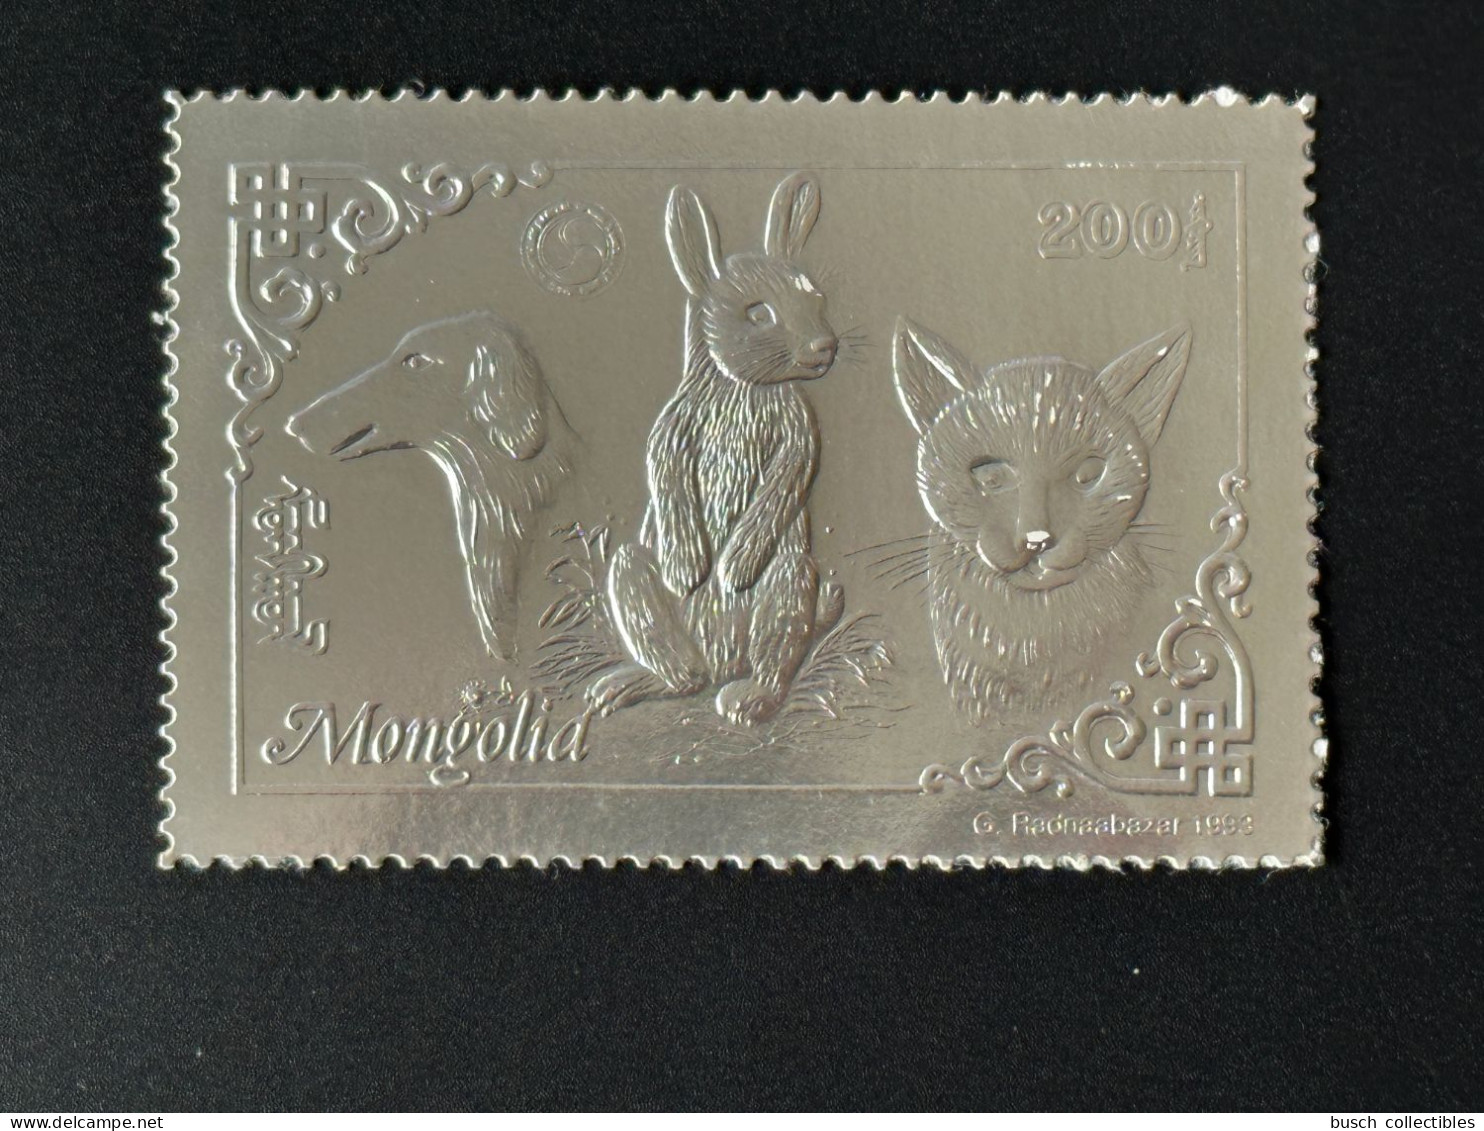 Mongolie Mongolia 1993 Mi. 2474 A Silver Argent Rotary Lions Chien Hund Dog Katze Cat Chat Lapin Rabbit Hase - Chats Domestiques